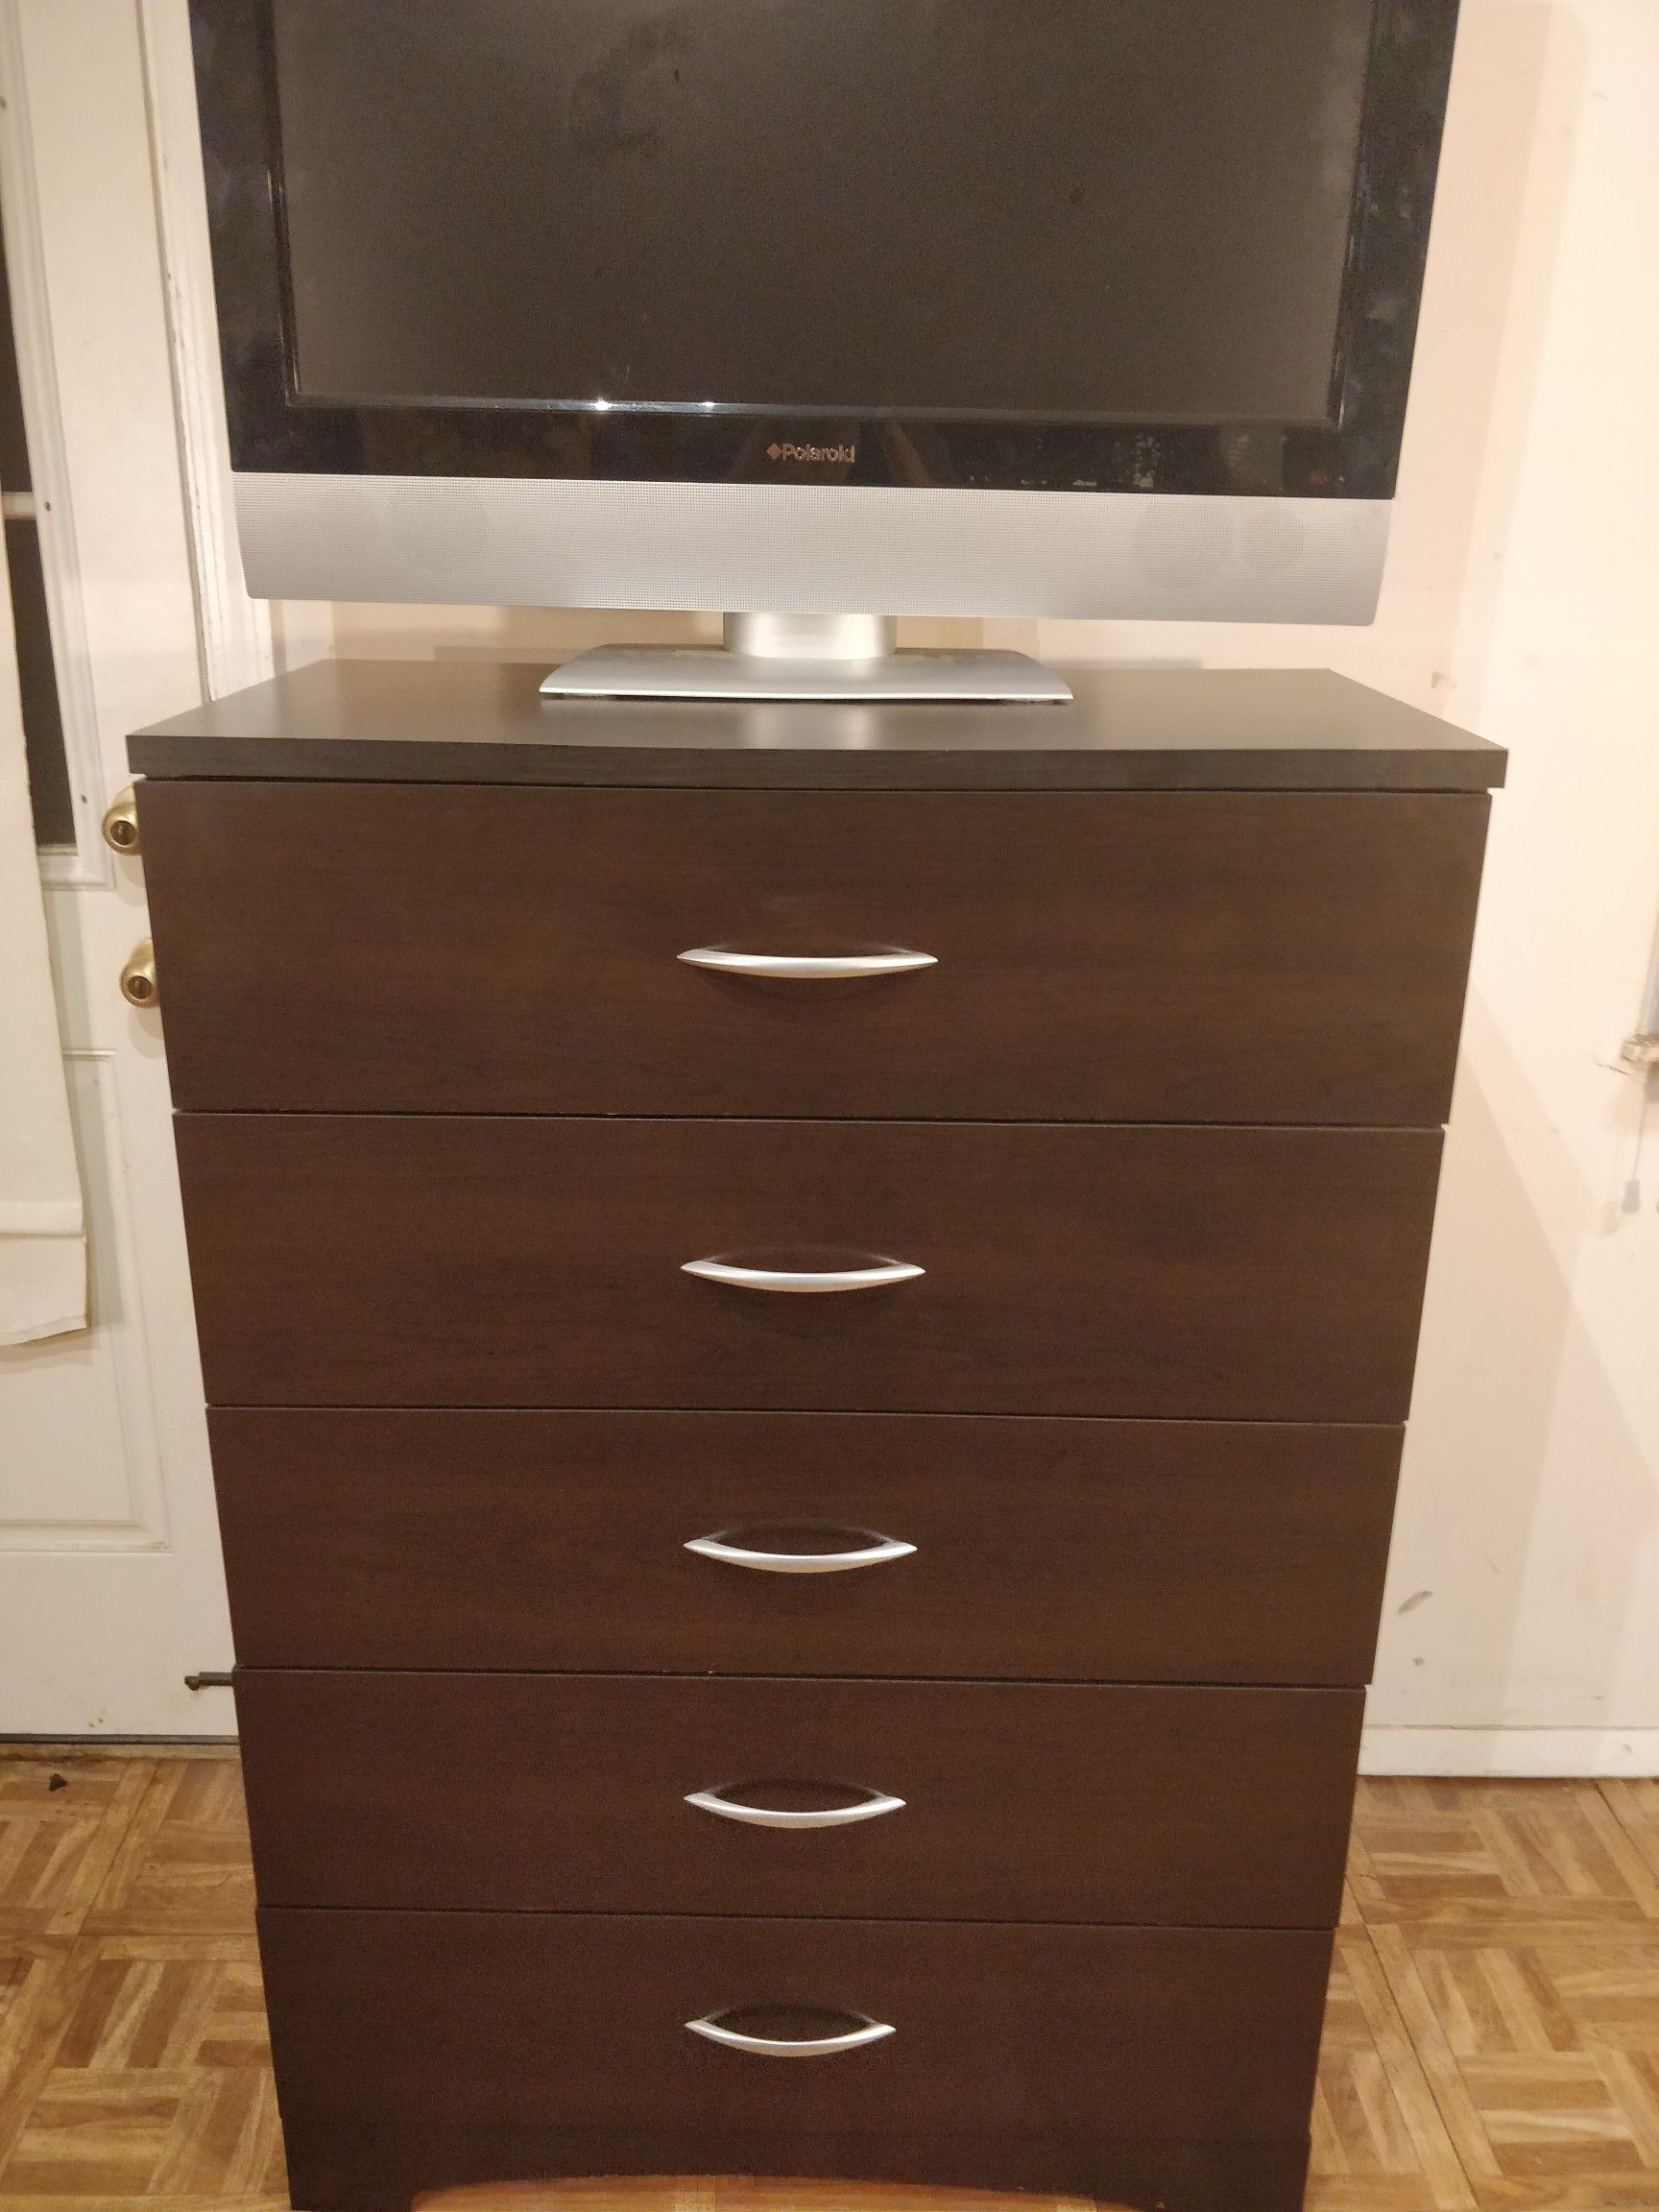 Like new chest dresser/TV stand with drawers in great condition, all drawers sliding smoothly, pet free smoke free. L31.5"*W16.5"*H46"